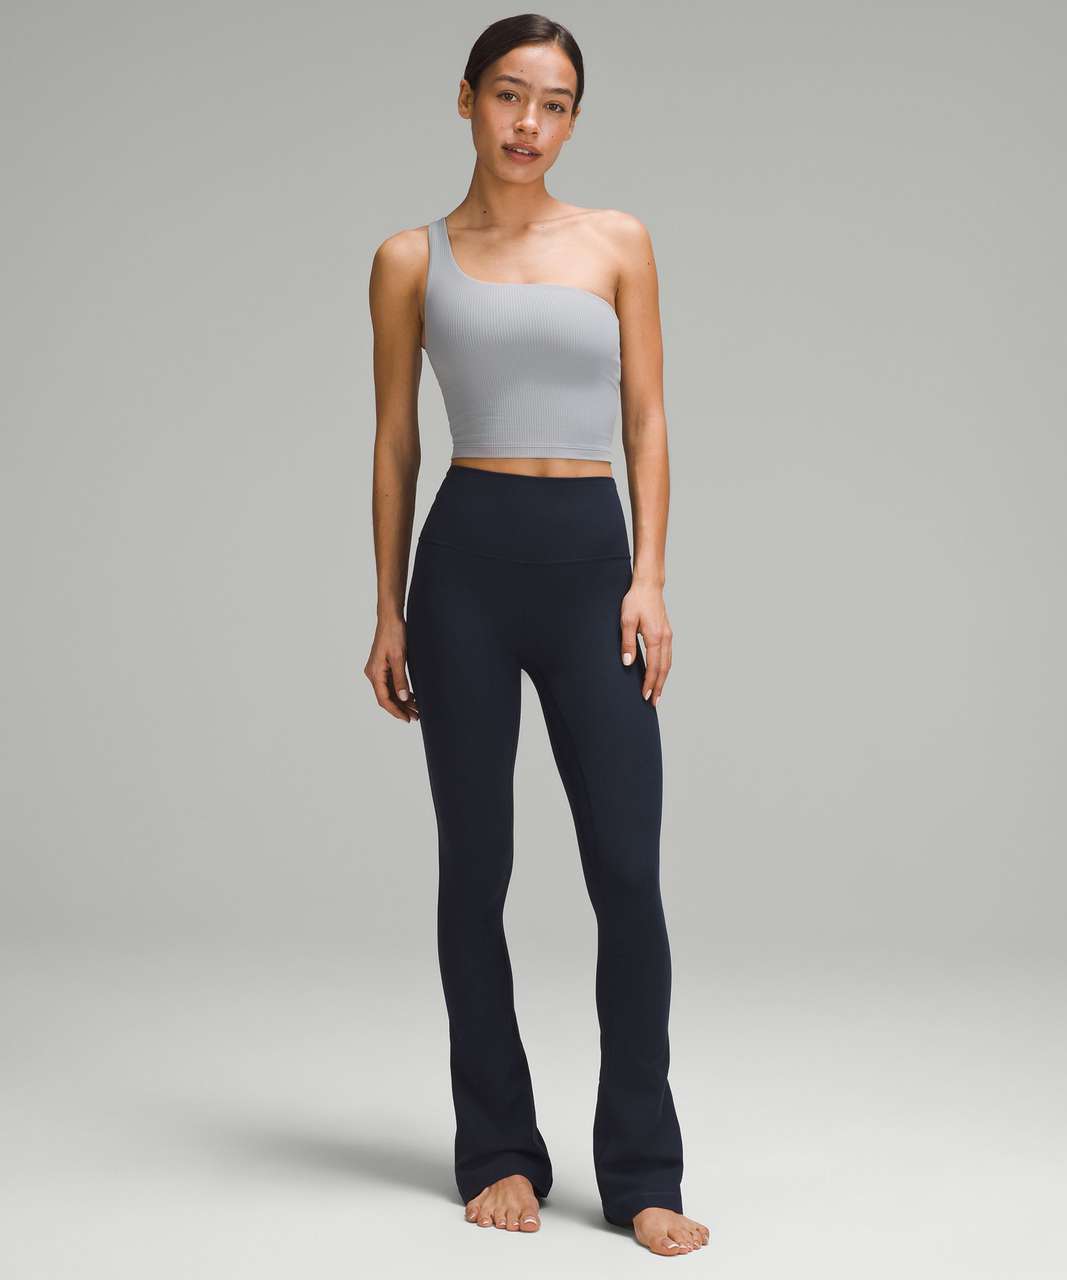 Fit Pic of New Align Low Rise Flare Pant (Chambray) : r/lululemon